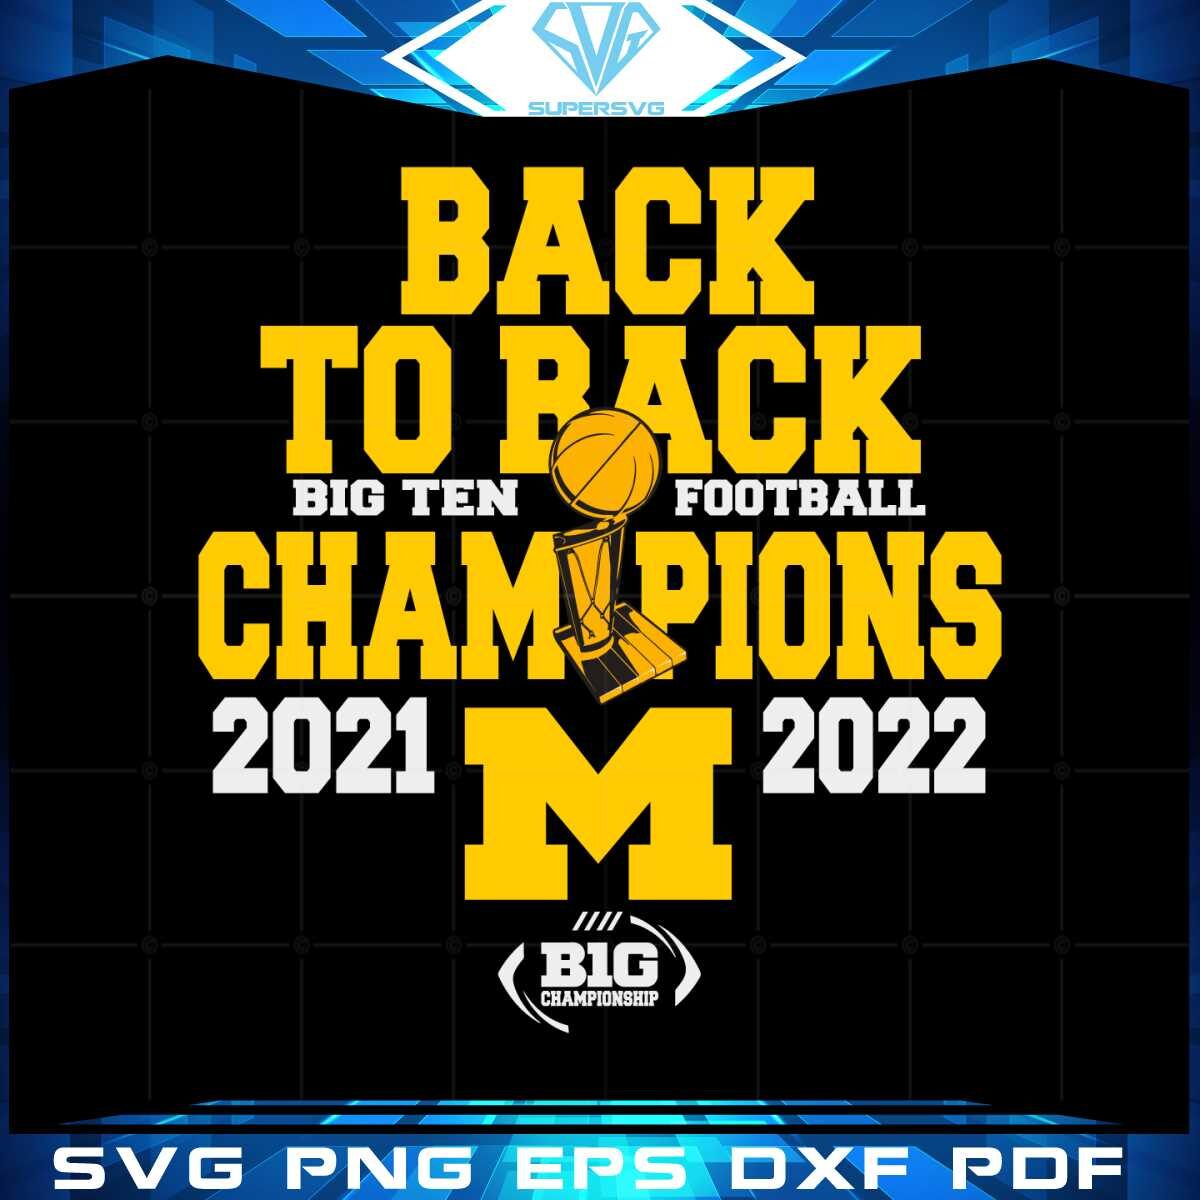 back-to-back-big-ten-champions-svg-graphic-designs-files